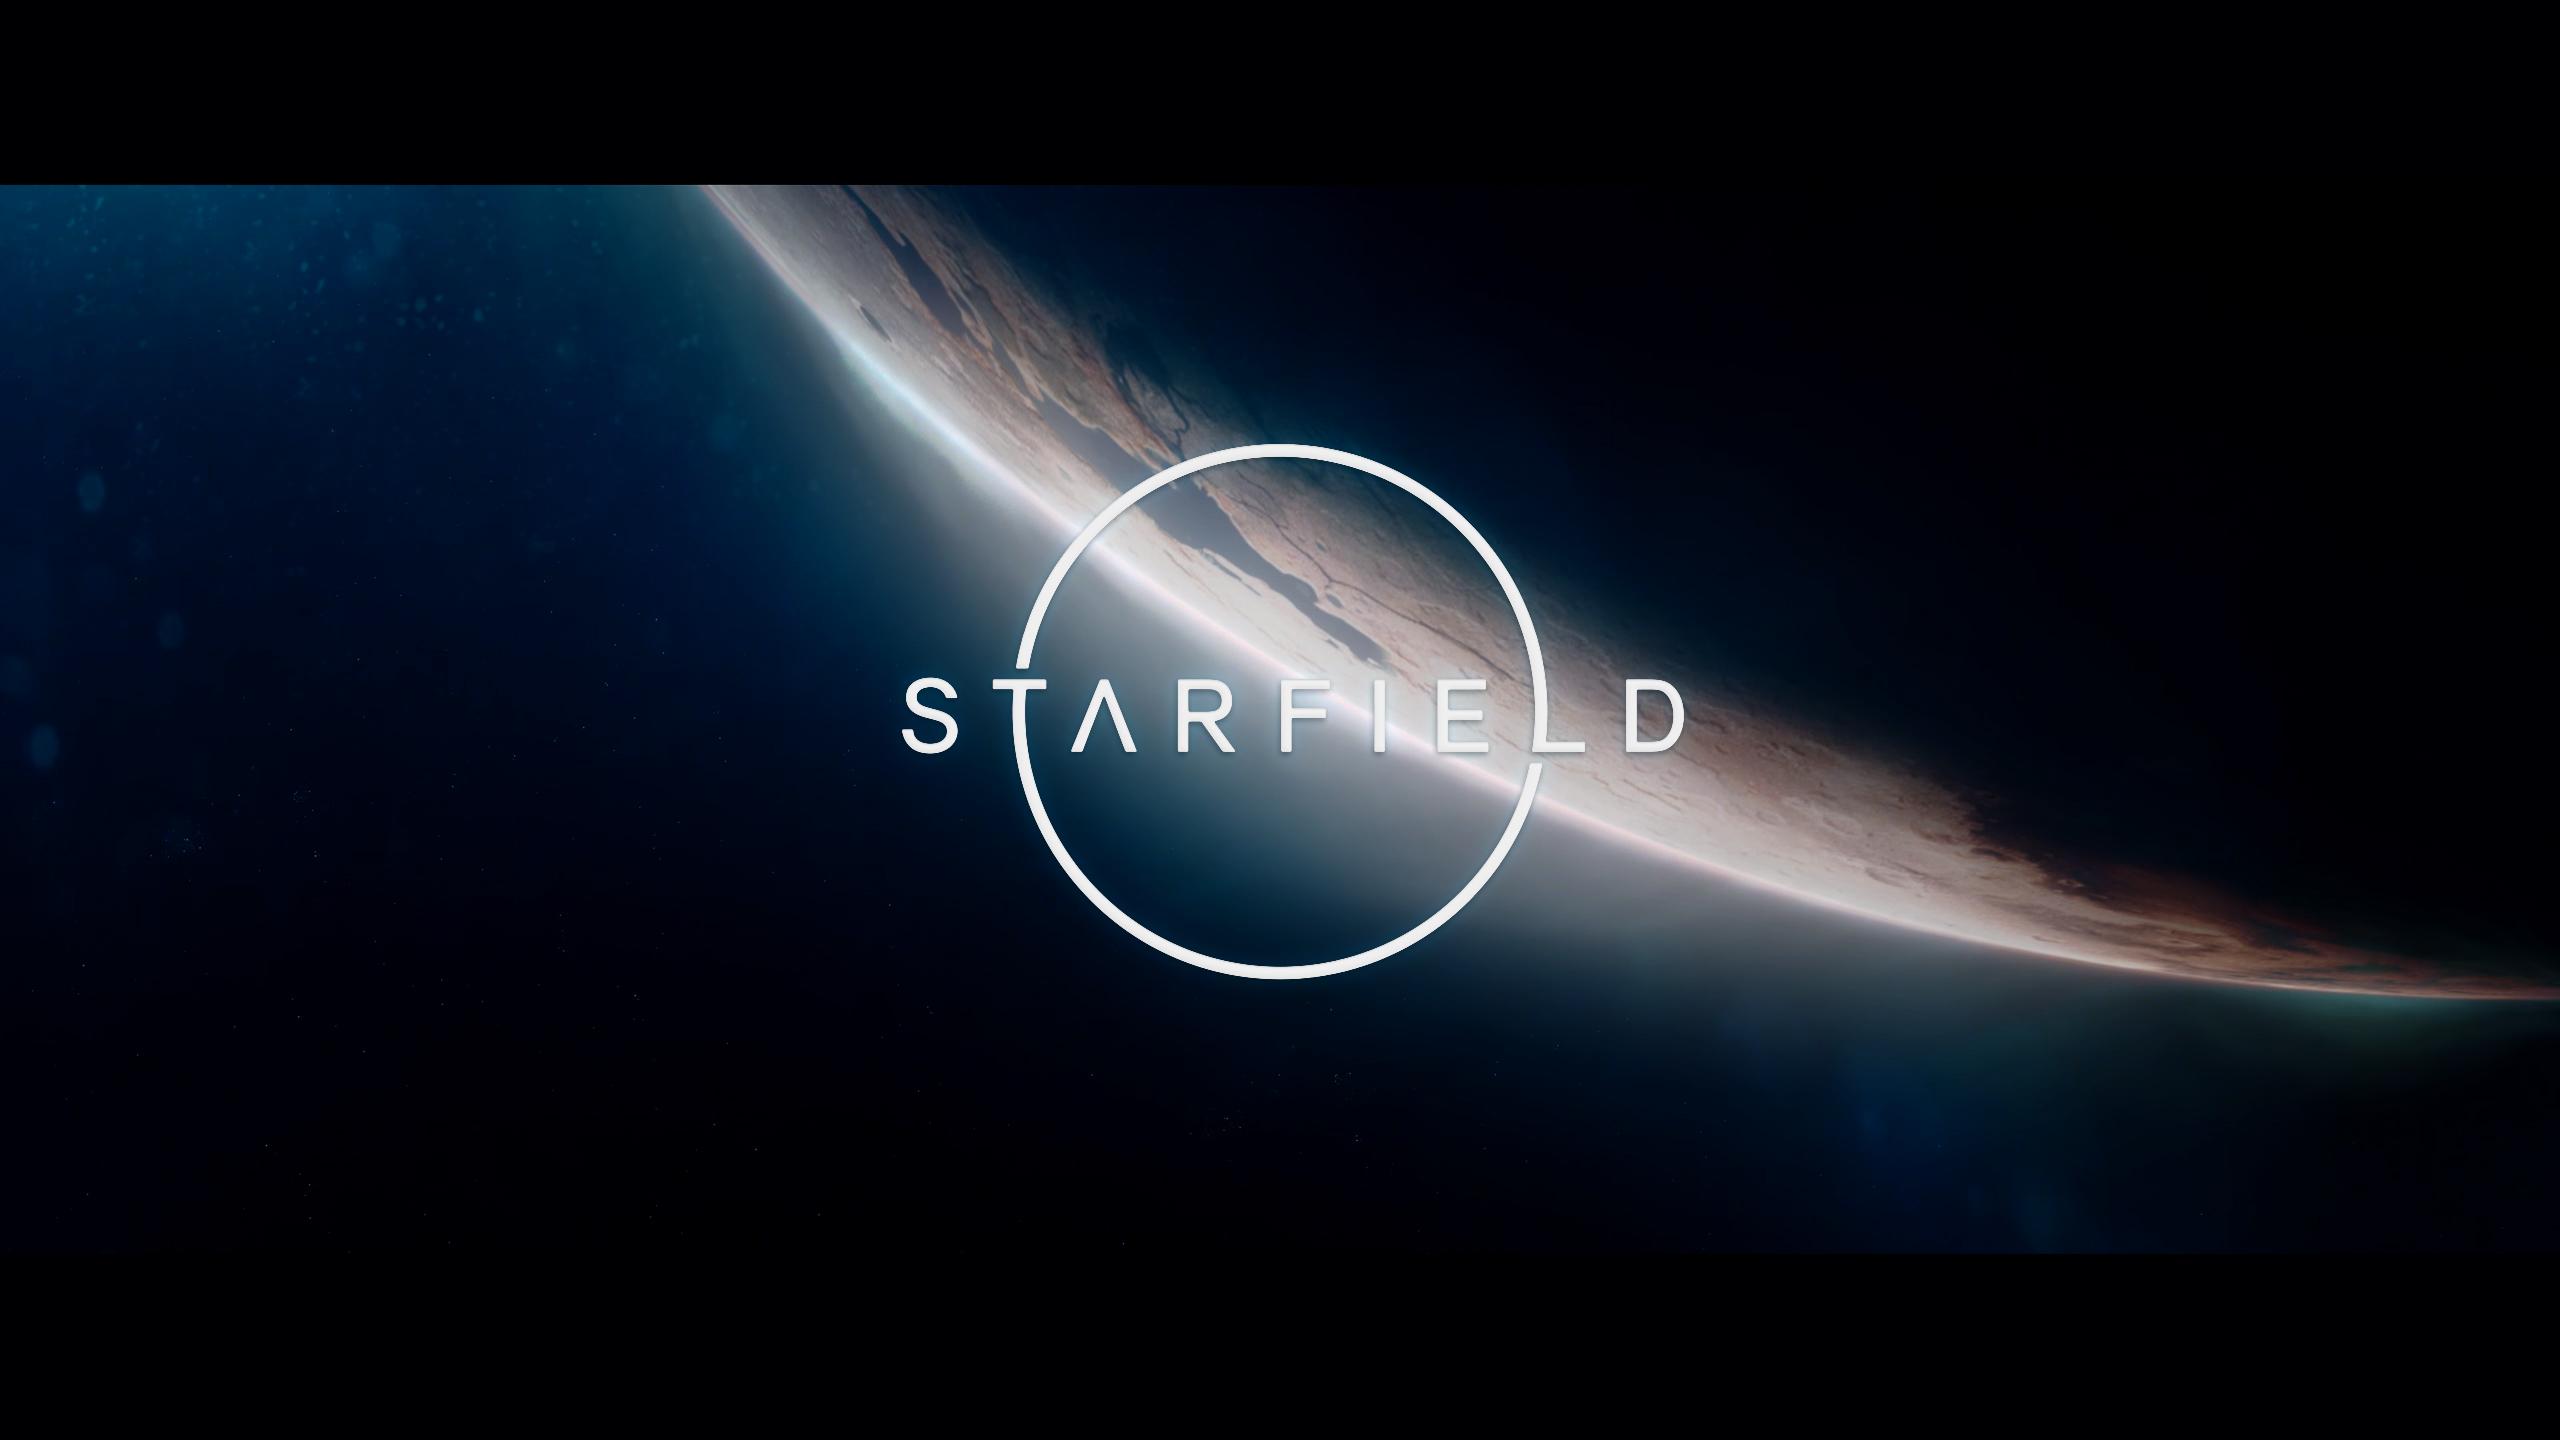 Starfield was announced at E3 2018 but Bethesda hasn't opened up at all regarding the game's development, just like they haven't about their entire company in the past year.